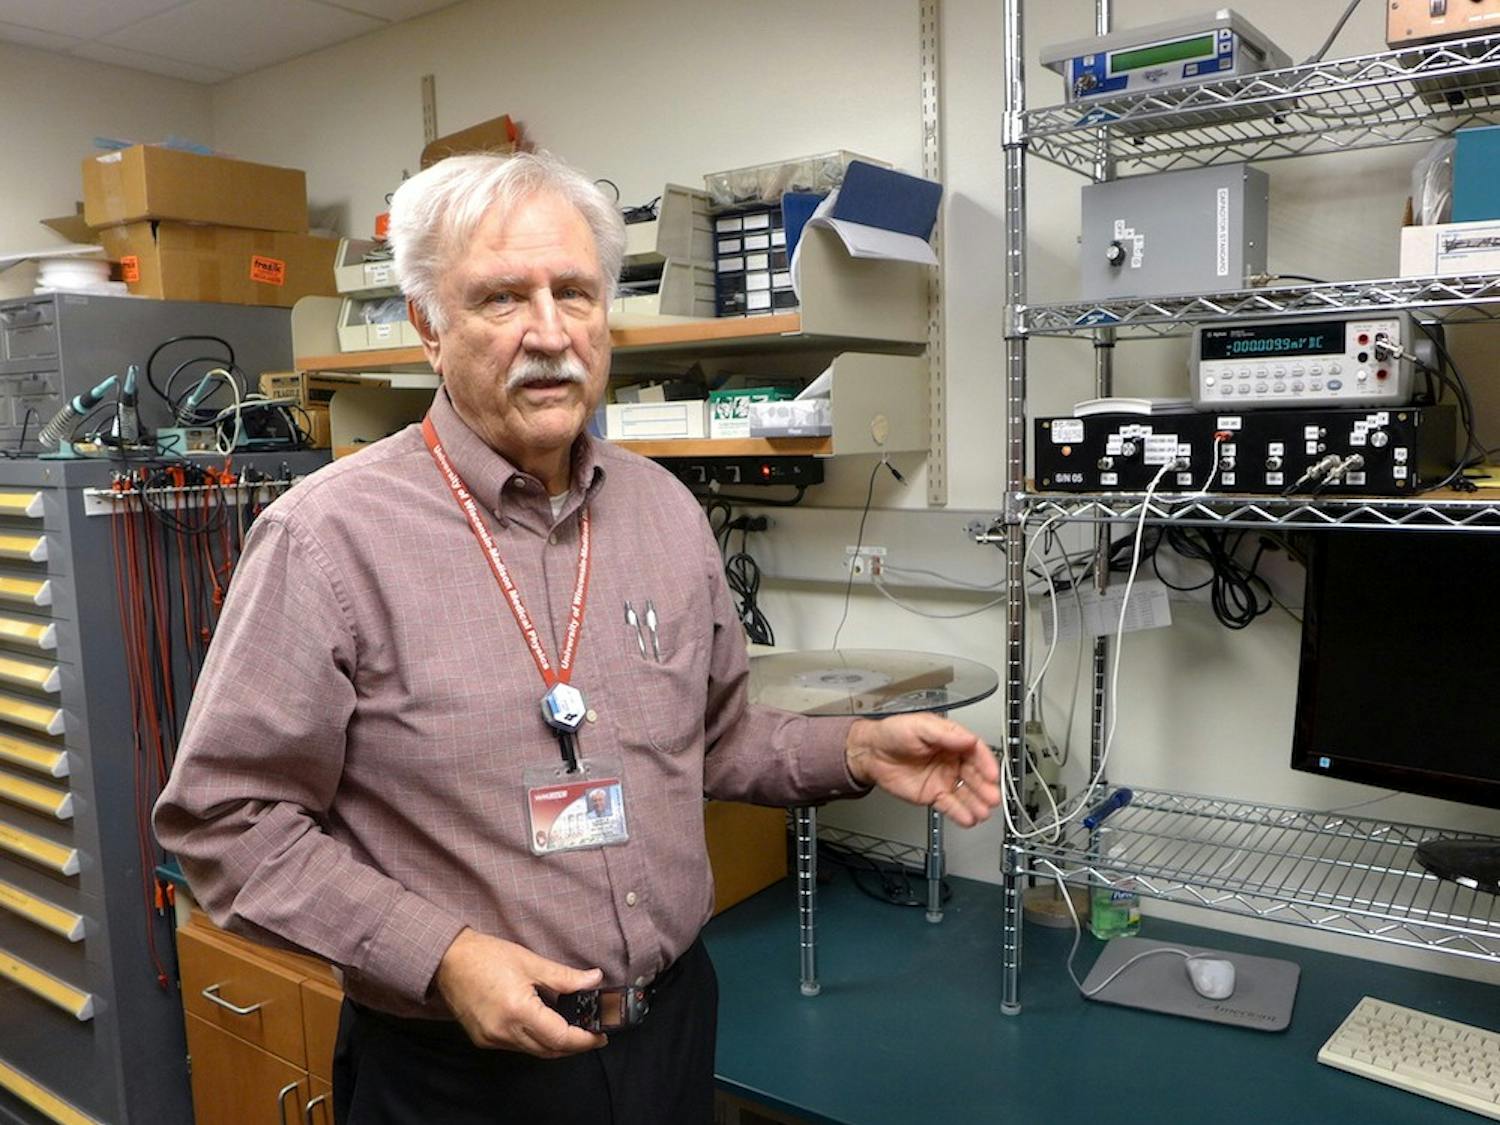 Larry DeWerd&nbsp;has worked at the University of Wisconsin Radiation Calibration Laboratory since 1981 and helps calibrate radiation instruments from across the country.